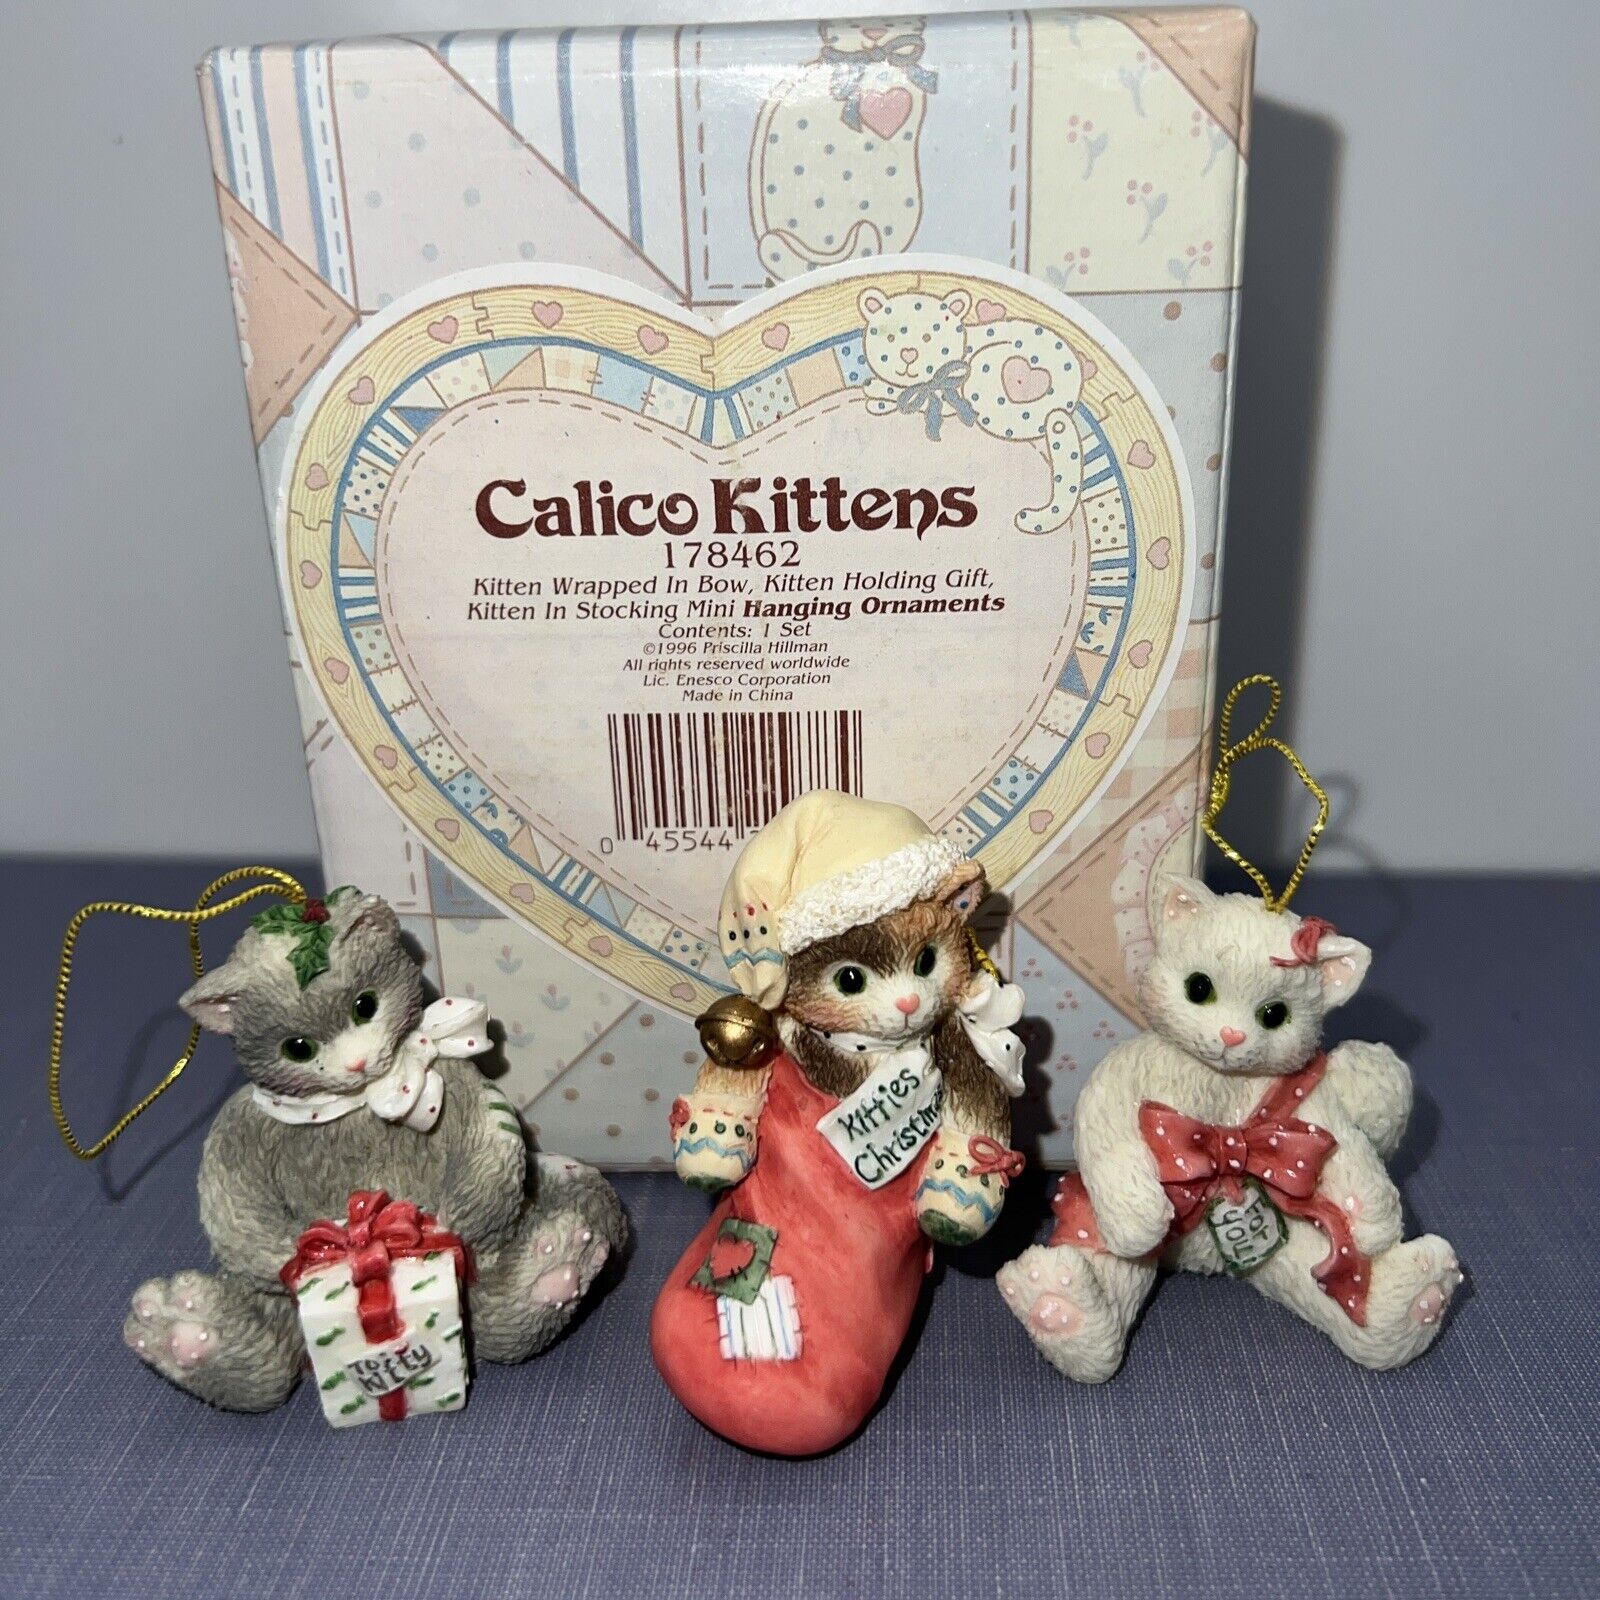 1996 Enesco 3 Calico Kittens Ornaments Kitten In Bow, Holding Gift, In Stocking